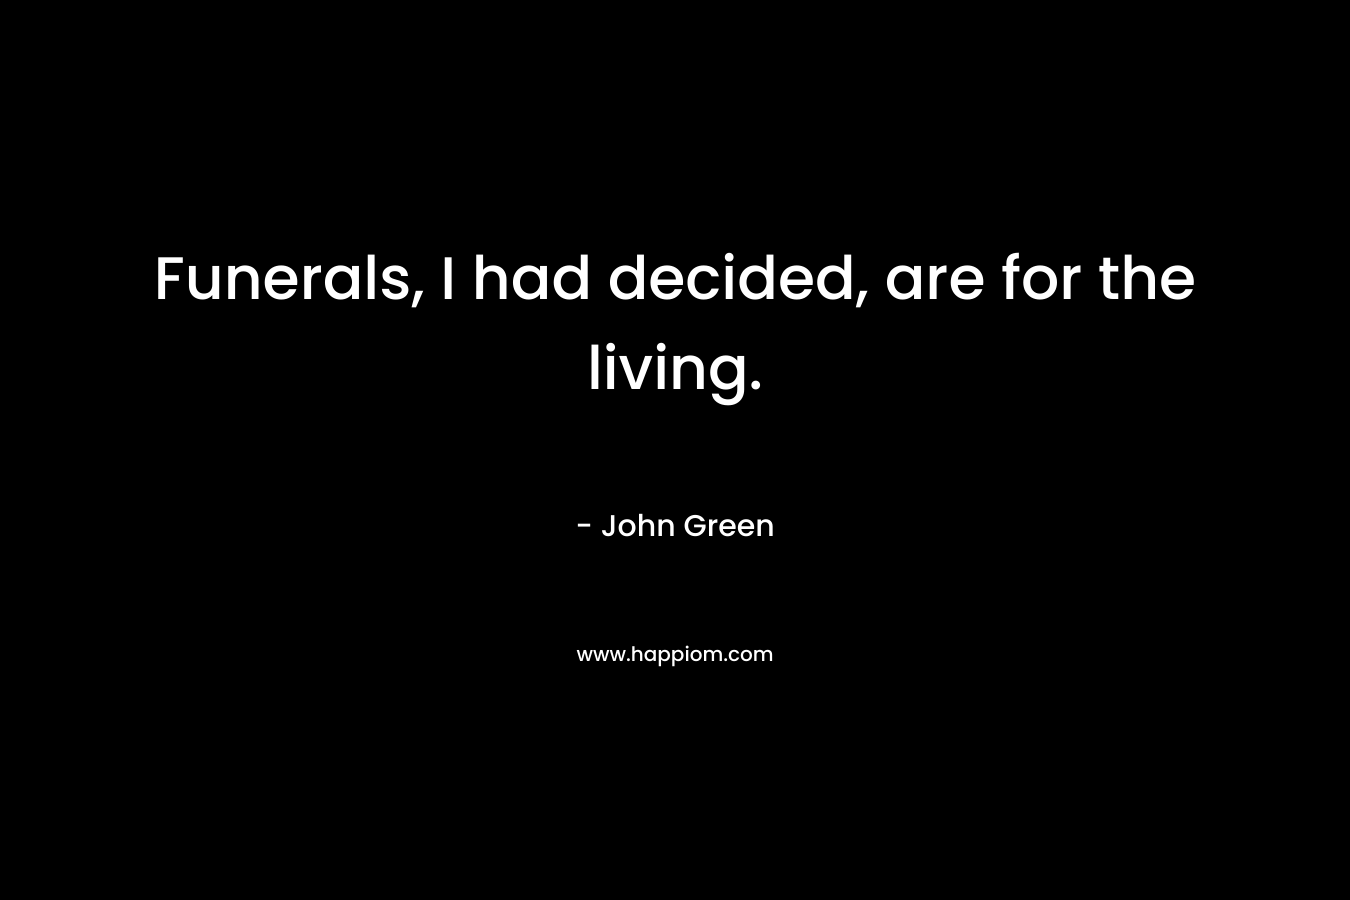 Funerals, I had decided, are for the living. – John Green